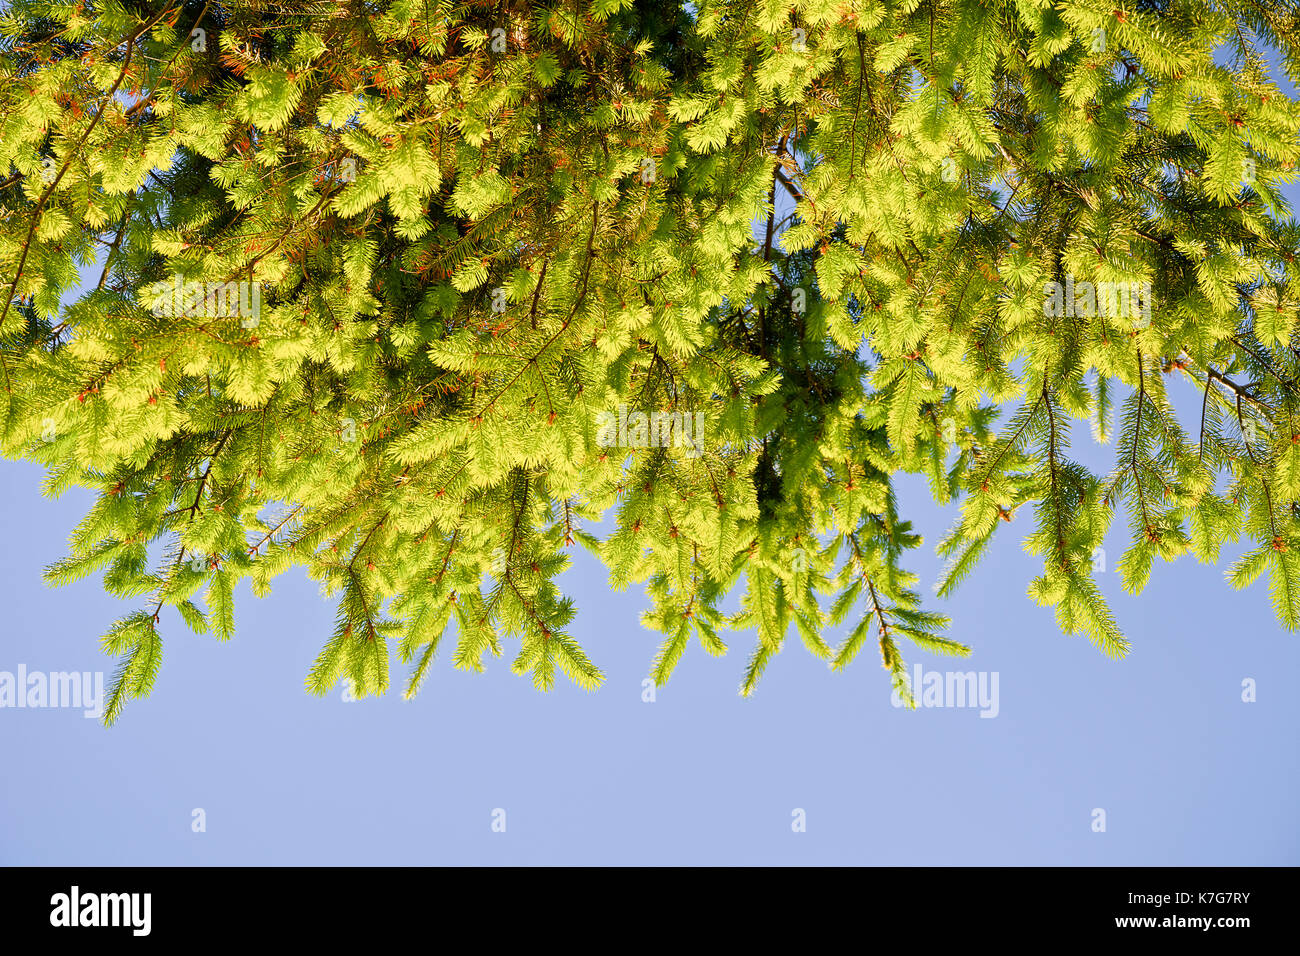 Branches of fir with young shoots against the sky. Fir branches illuminated by the afternoon sun. Stock Photo